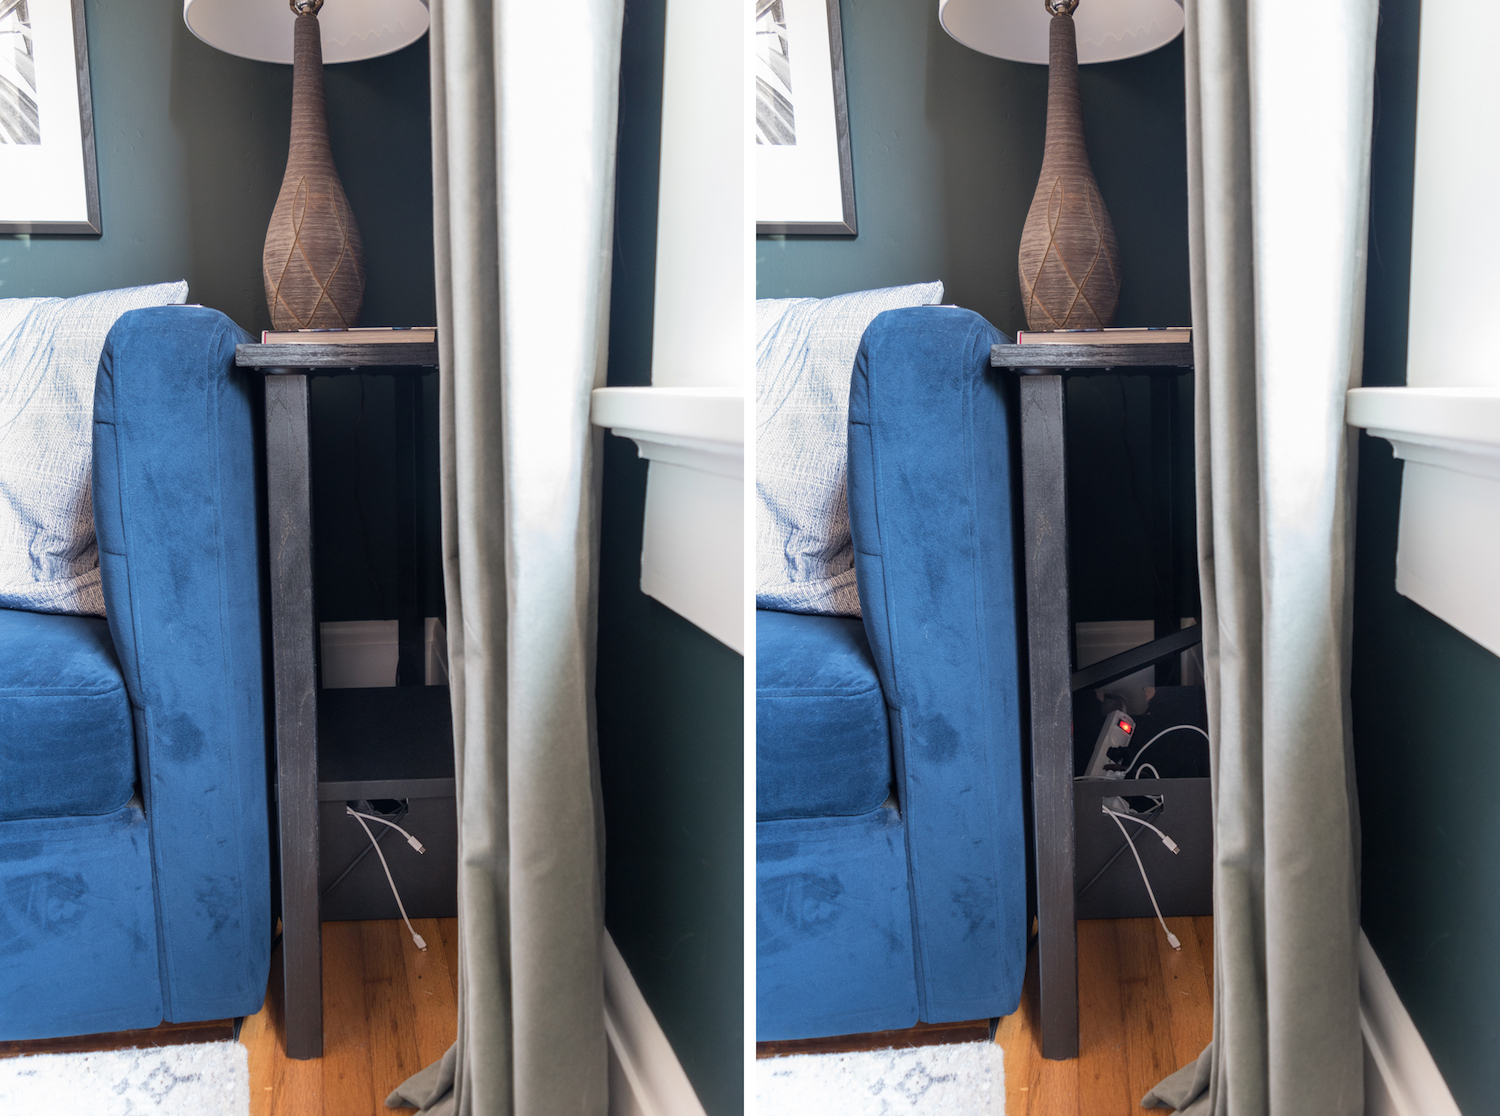 How To Hide Cords and Outlets In Every Room - No Photoshop